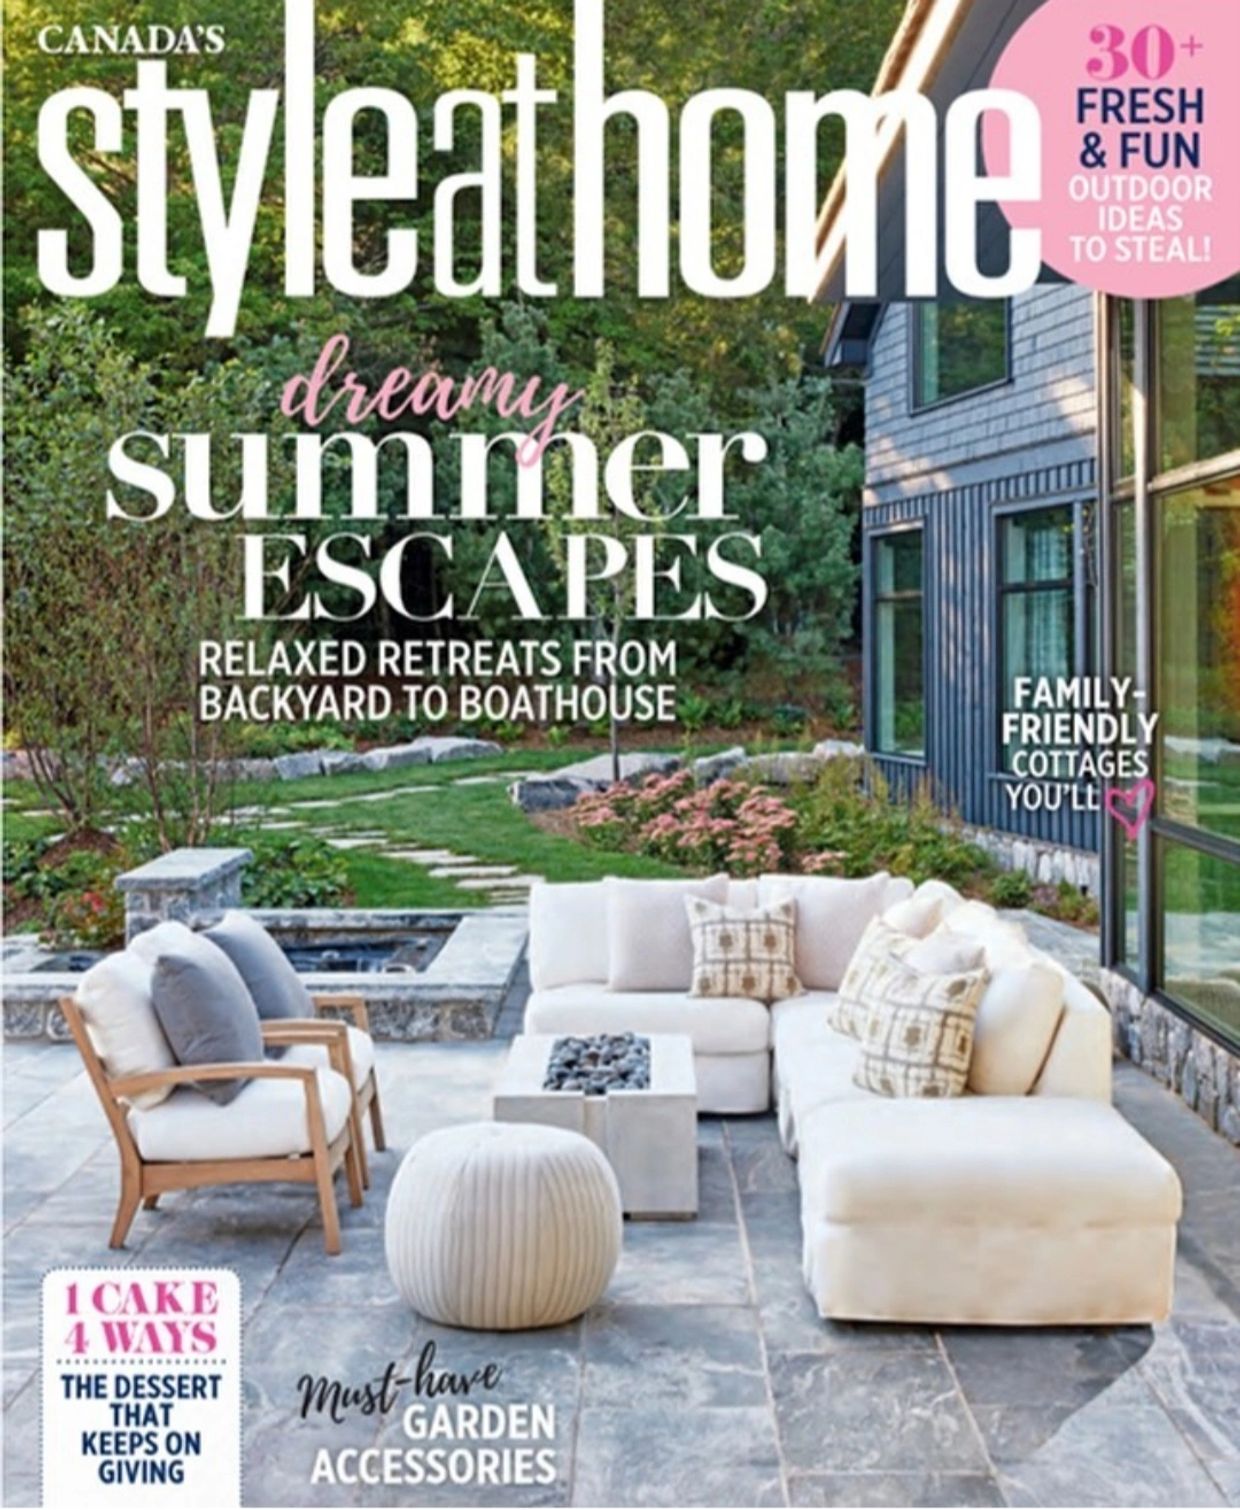 Real Deal Carpentry INC craftsmanship featured on the cover of Style at Home Magazine.